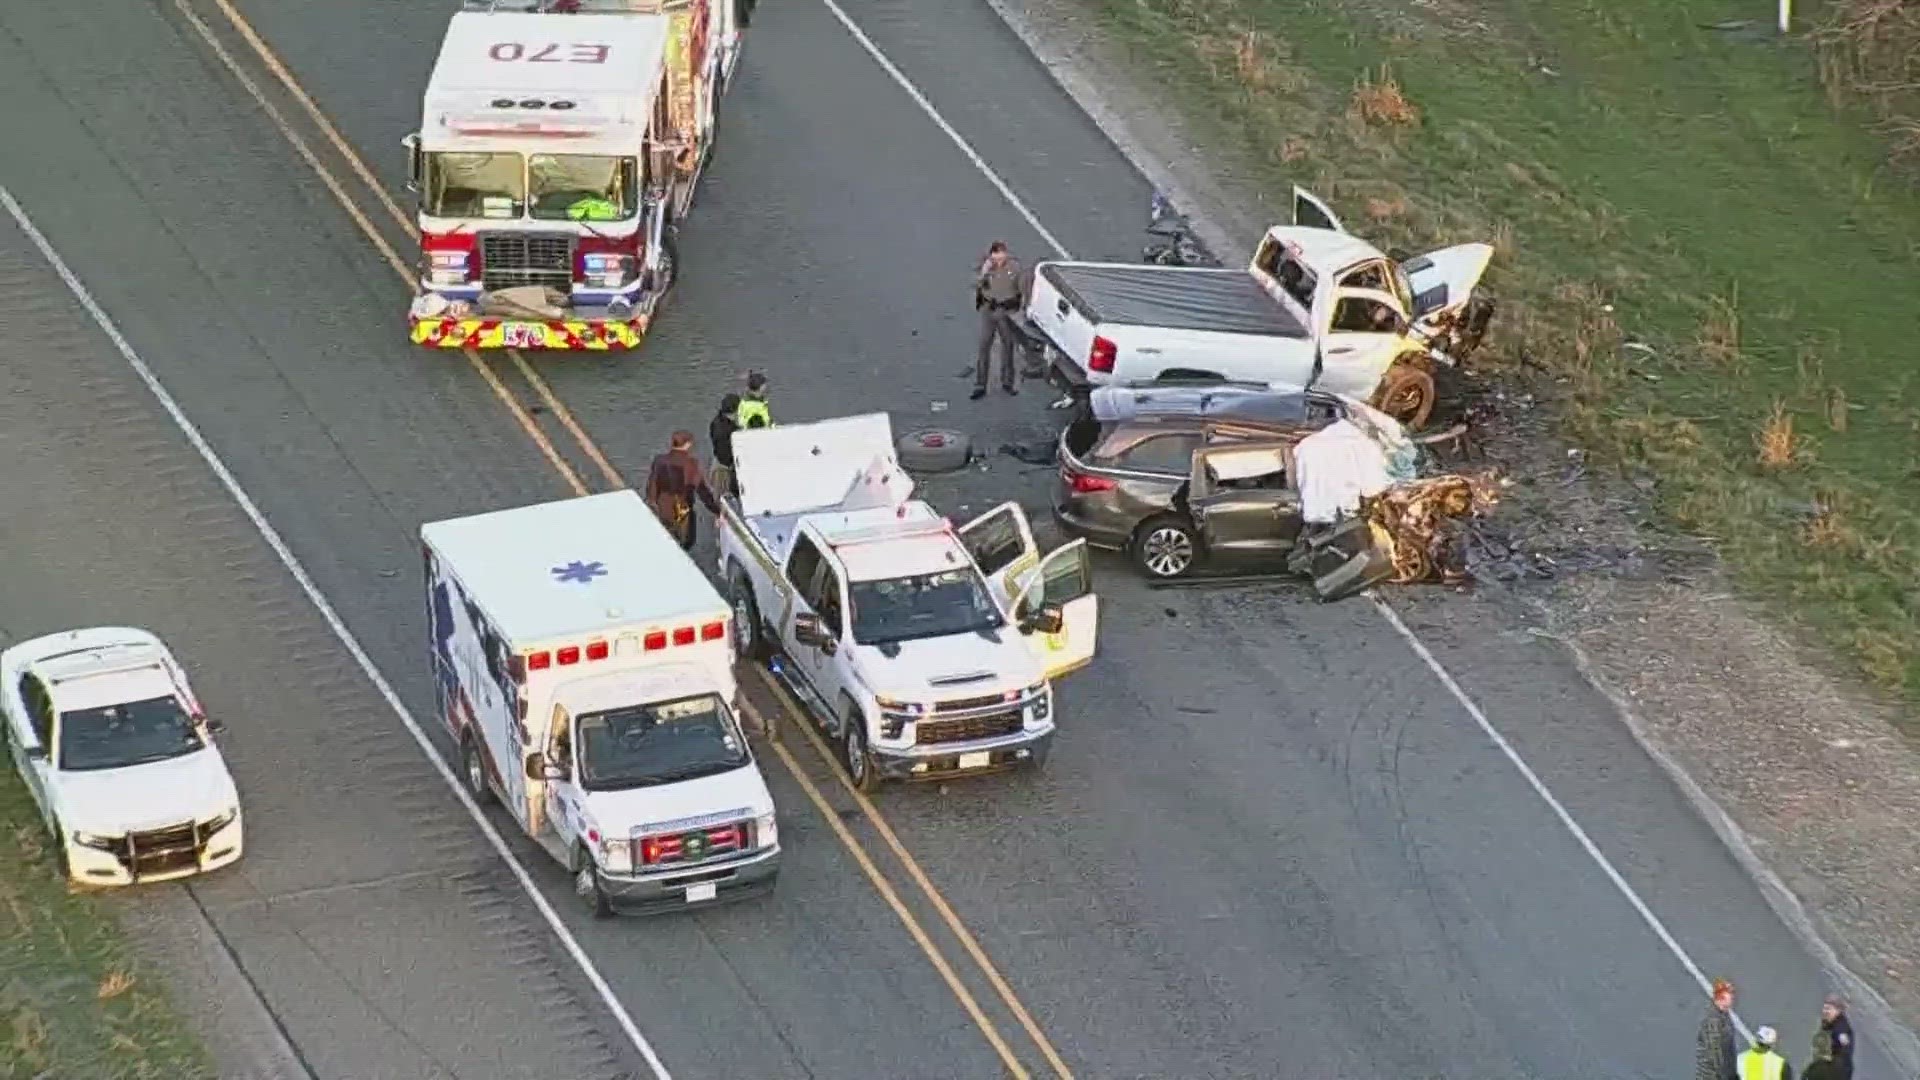 Six people were killed in a two-car crash in the area on Tuesday.